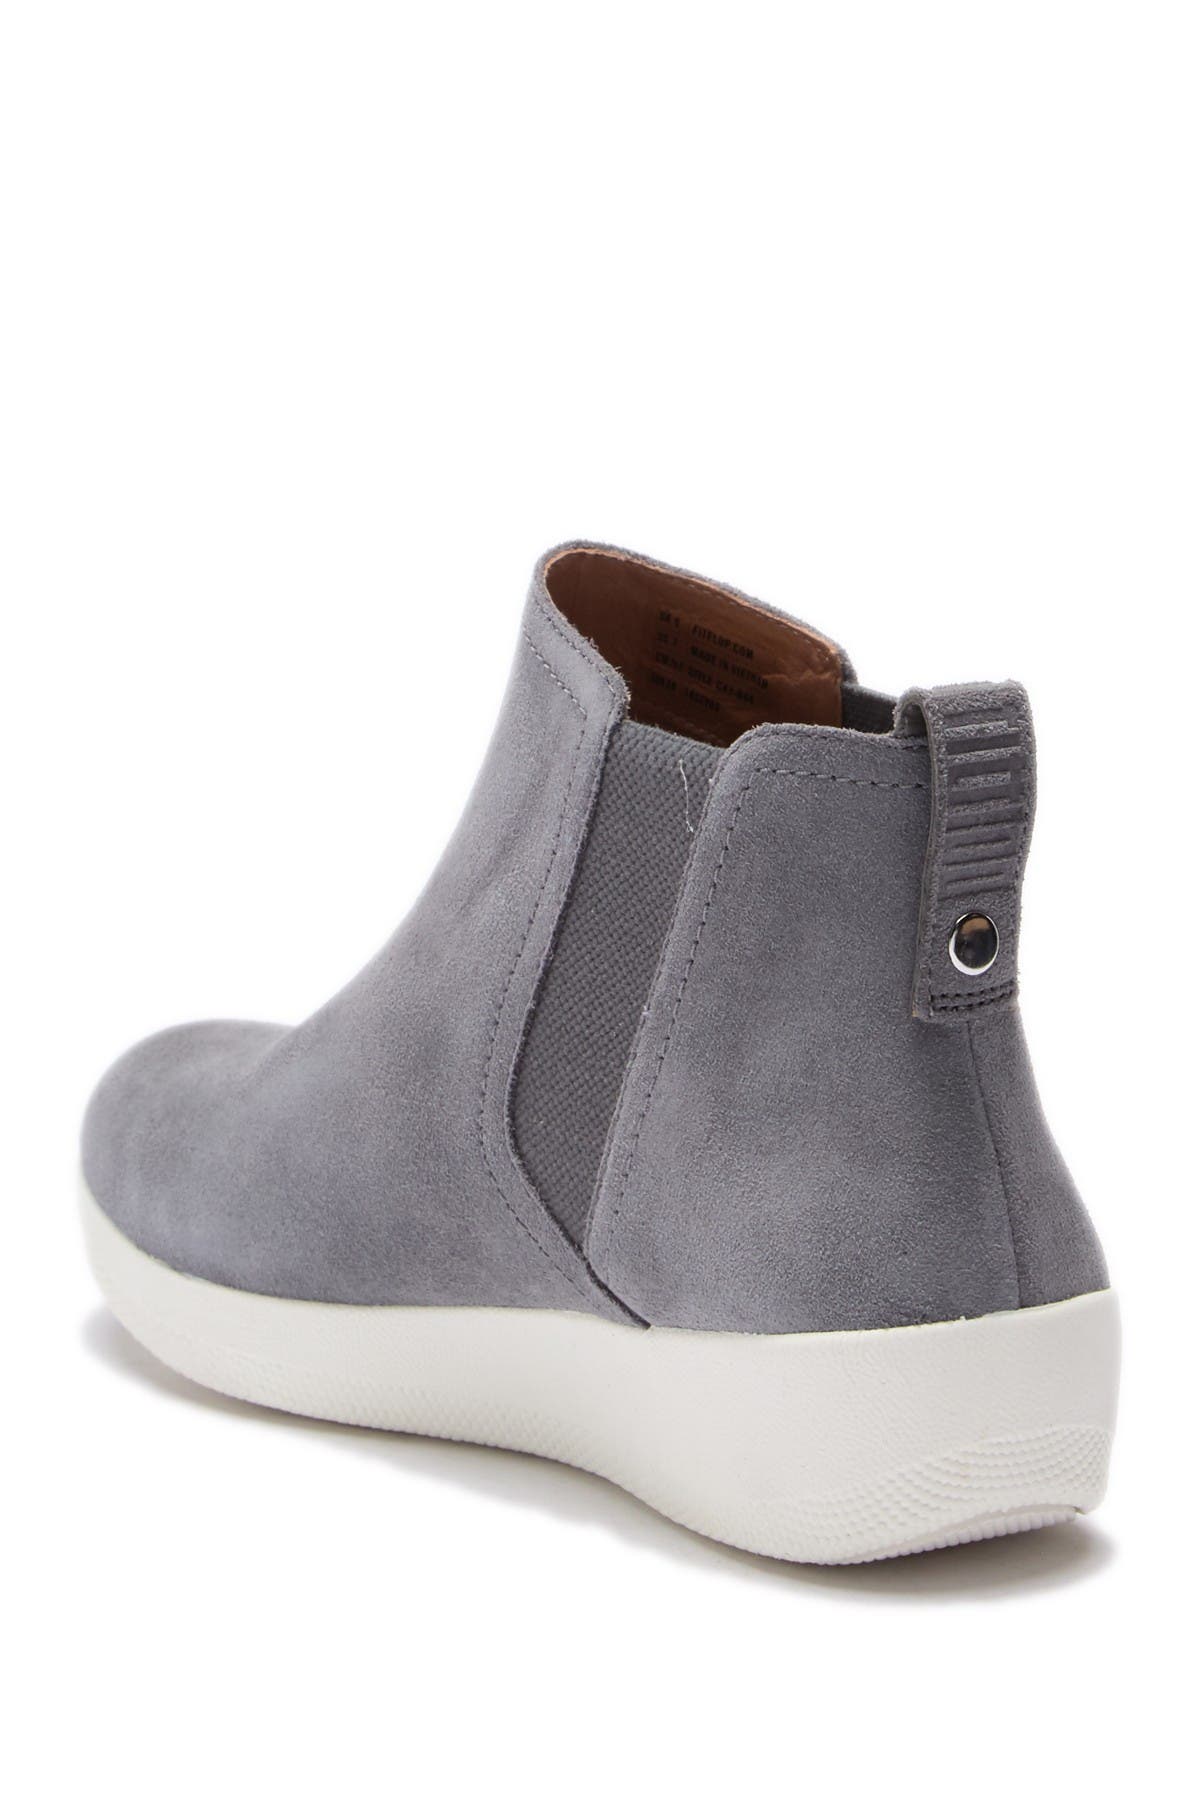 Fitflop Super Chelsea Suede Platform Boot In Silver6